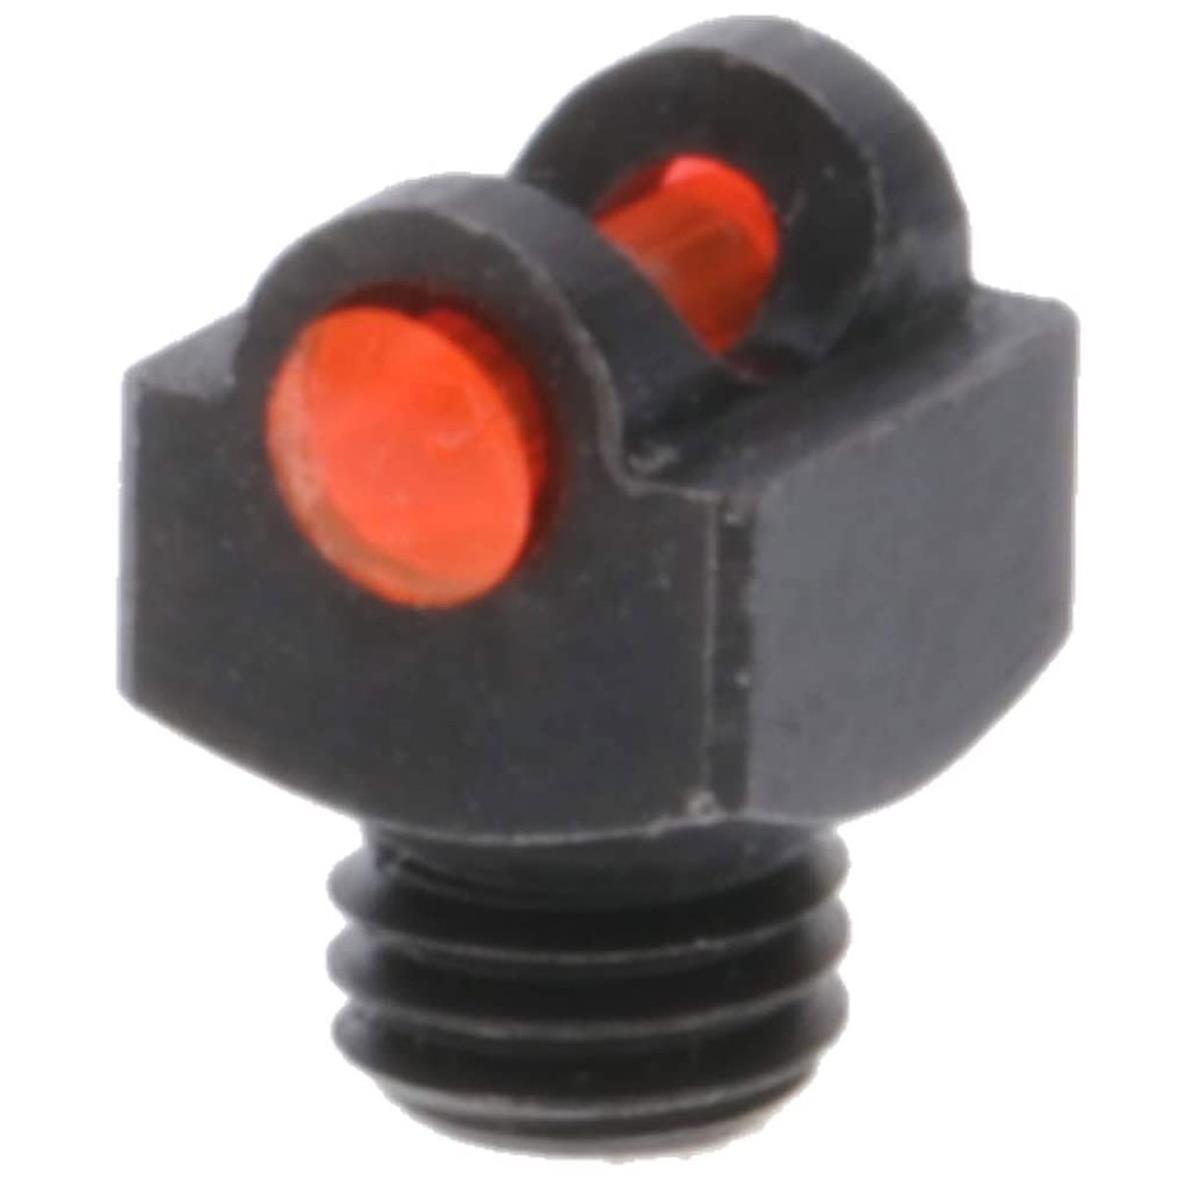 Image of TruGlo Starbrite 3-56 Deluxe Bead Sight